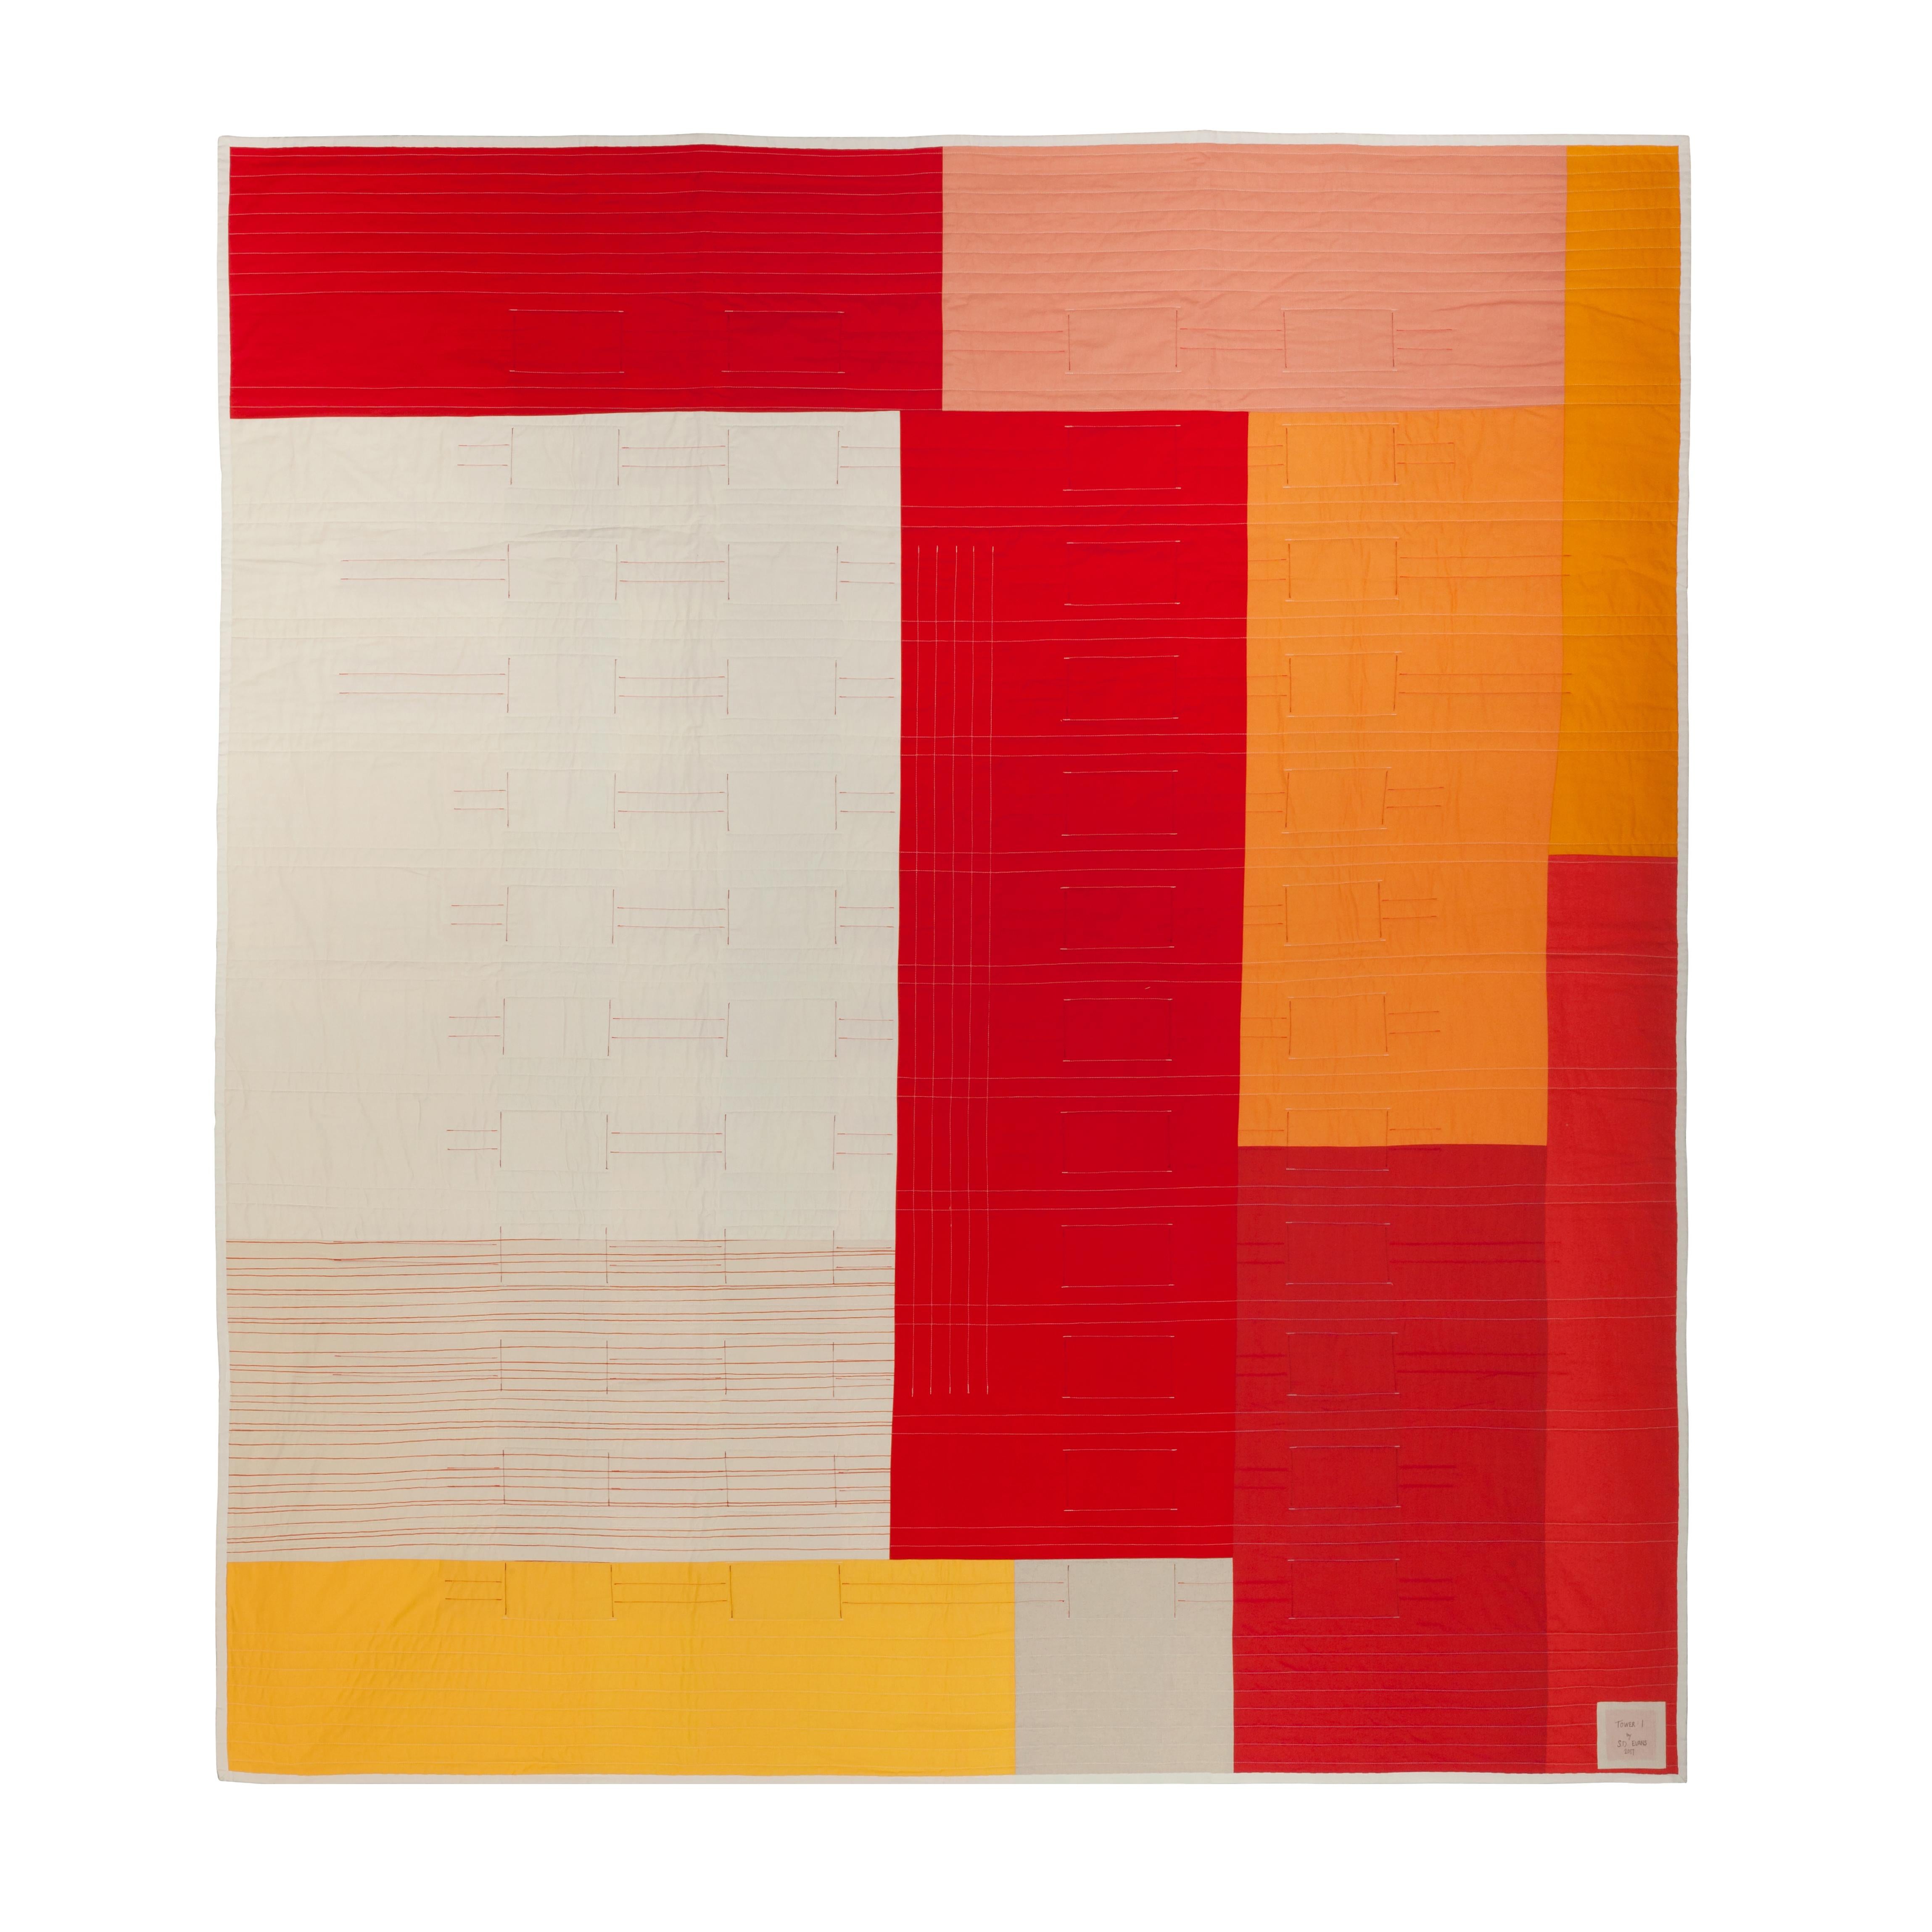 “Tower: 1 (Rage)” is a cotton quilt created to explore color and push the boundaries of traditional patchwork. These quilts use a weaving technique as well as traditional piecing to push the boundaries of quilt making and question the quilt’s form